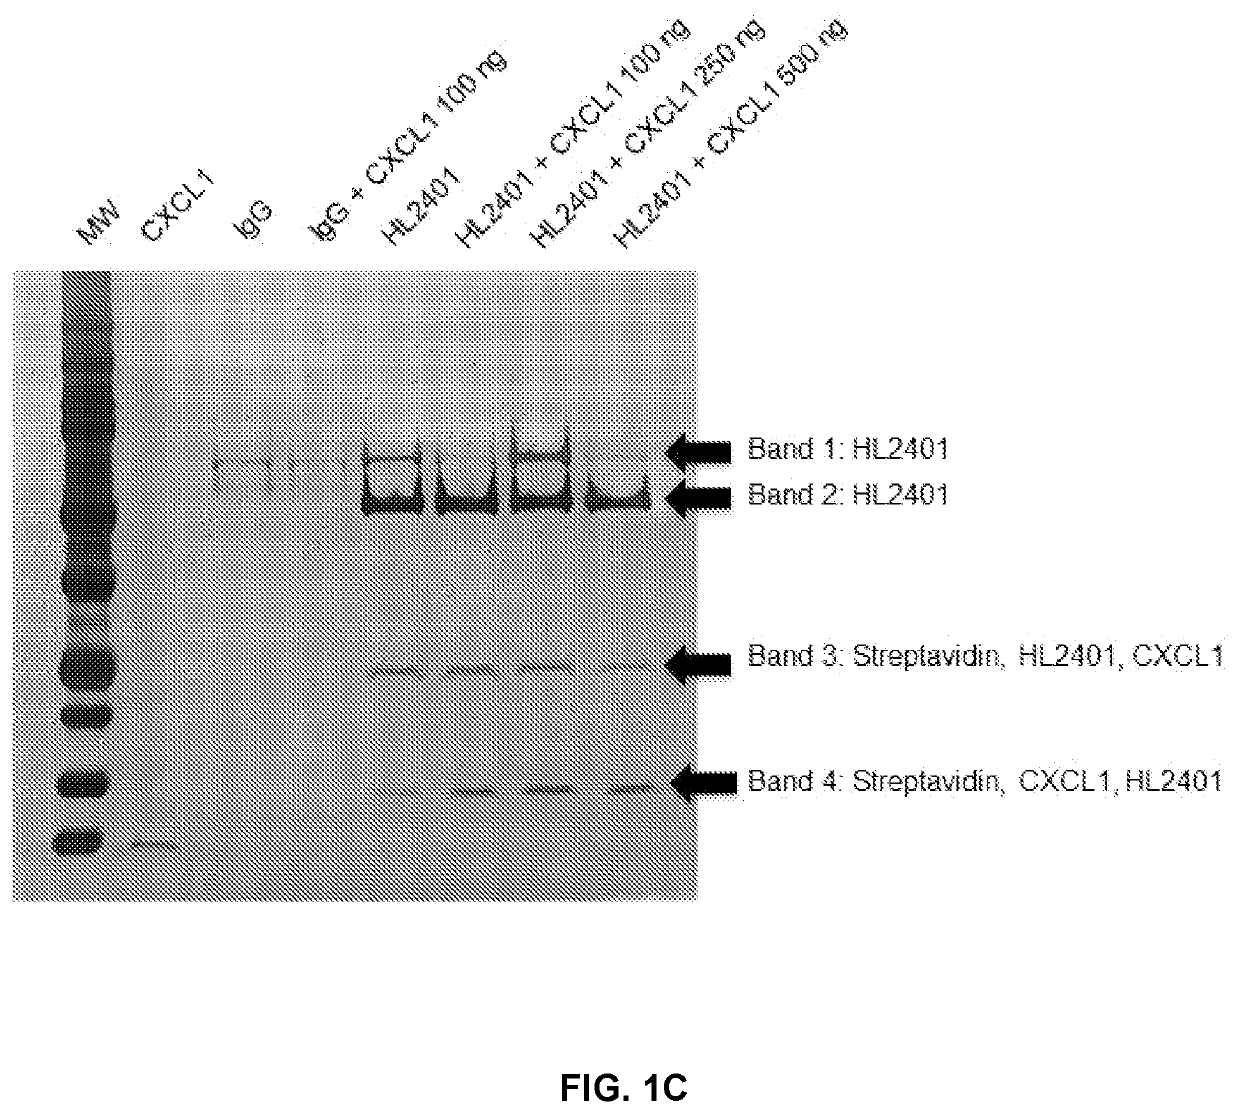 Compositions and methods for treatment of diseases involving cxcl1 function